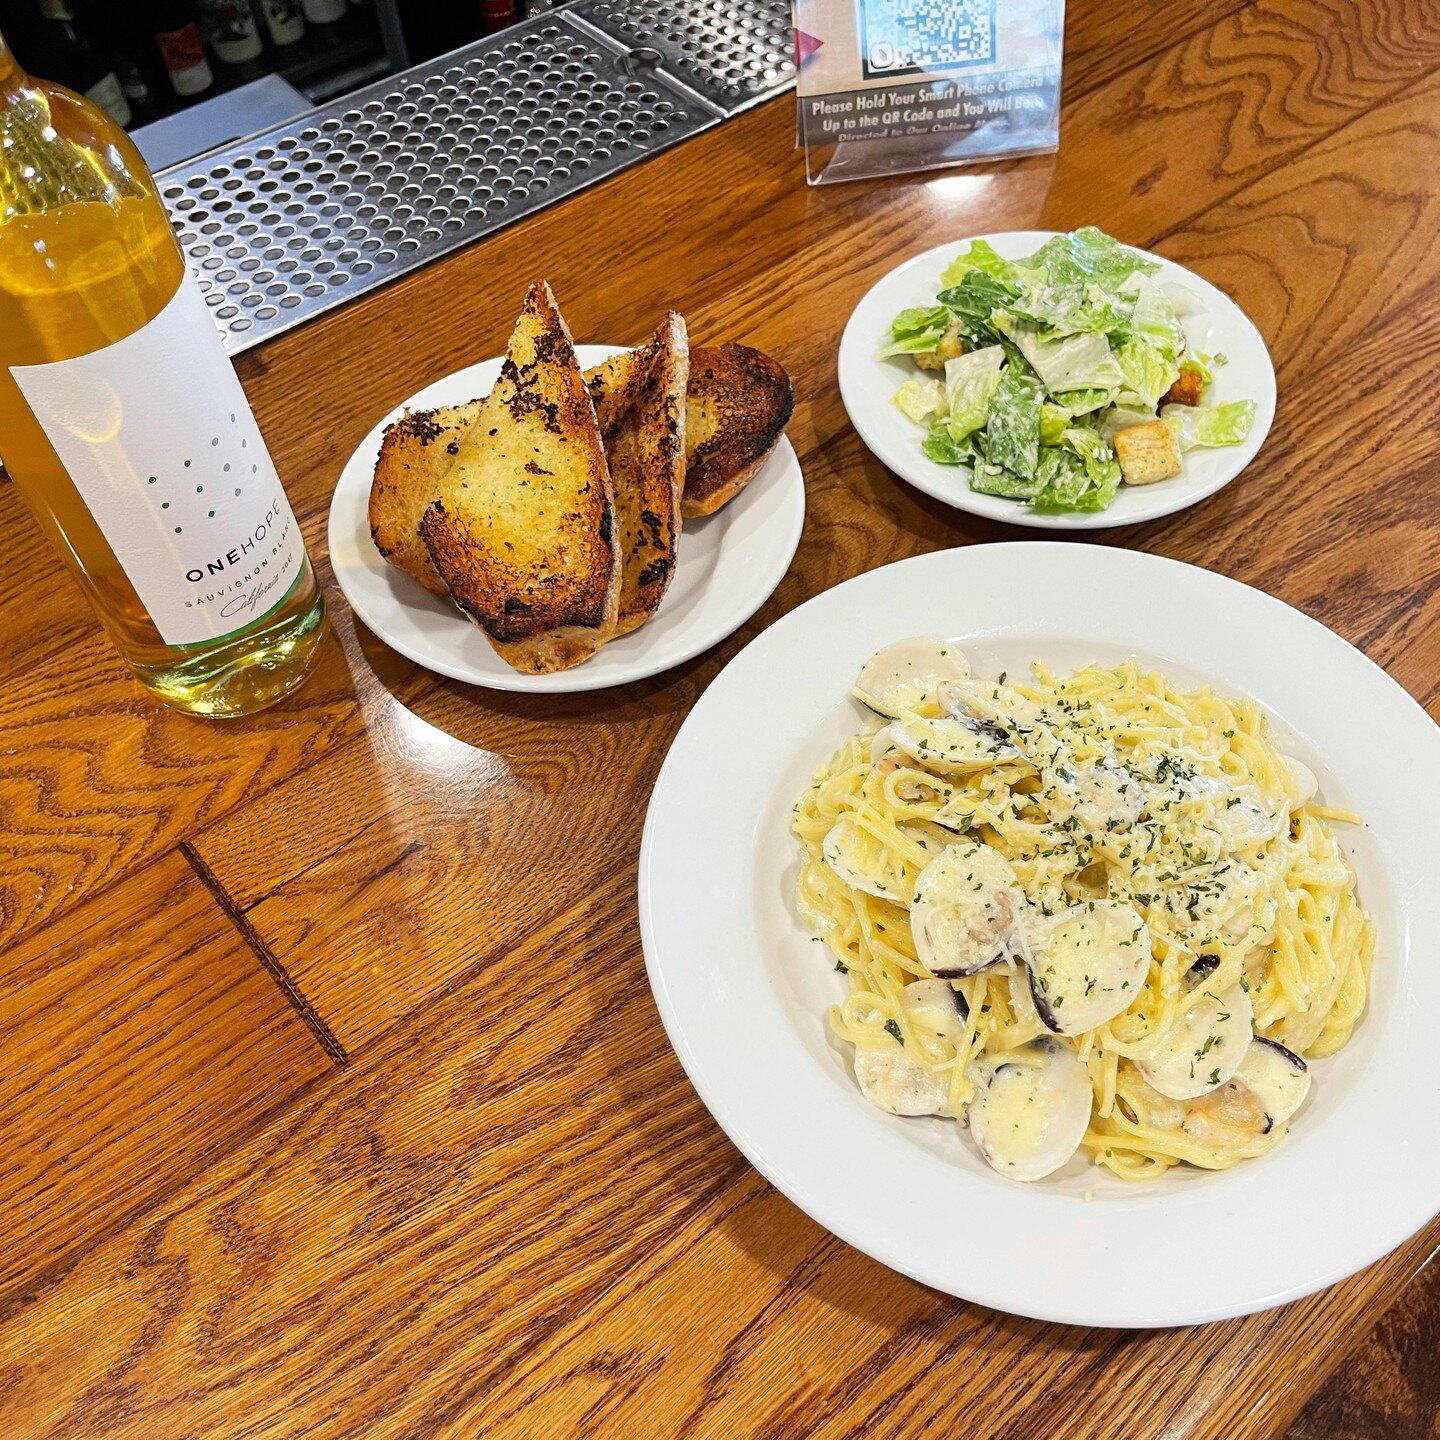 🍝 Spaghetti 🍝Tuesday is Every Tuesday @ The Hangout!!😃

Includes Choice of Spaghetti (Bolognese, Chicken Pesto, Clam Alfredo, Beef Stroganoff, and More) PLUS Salad 🥗 AND Garlic 🥖Bread!! $15.95!! Plus 1/2 OFF Bottles of 🍷Wine!!

🔗 Order now. Li